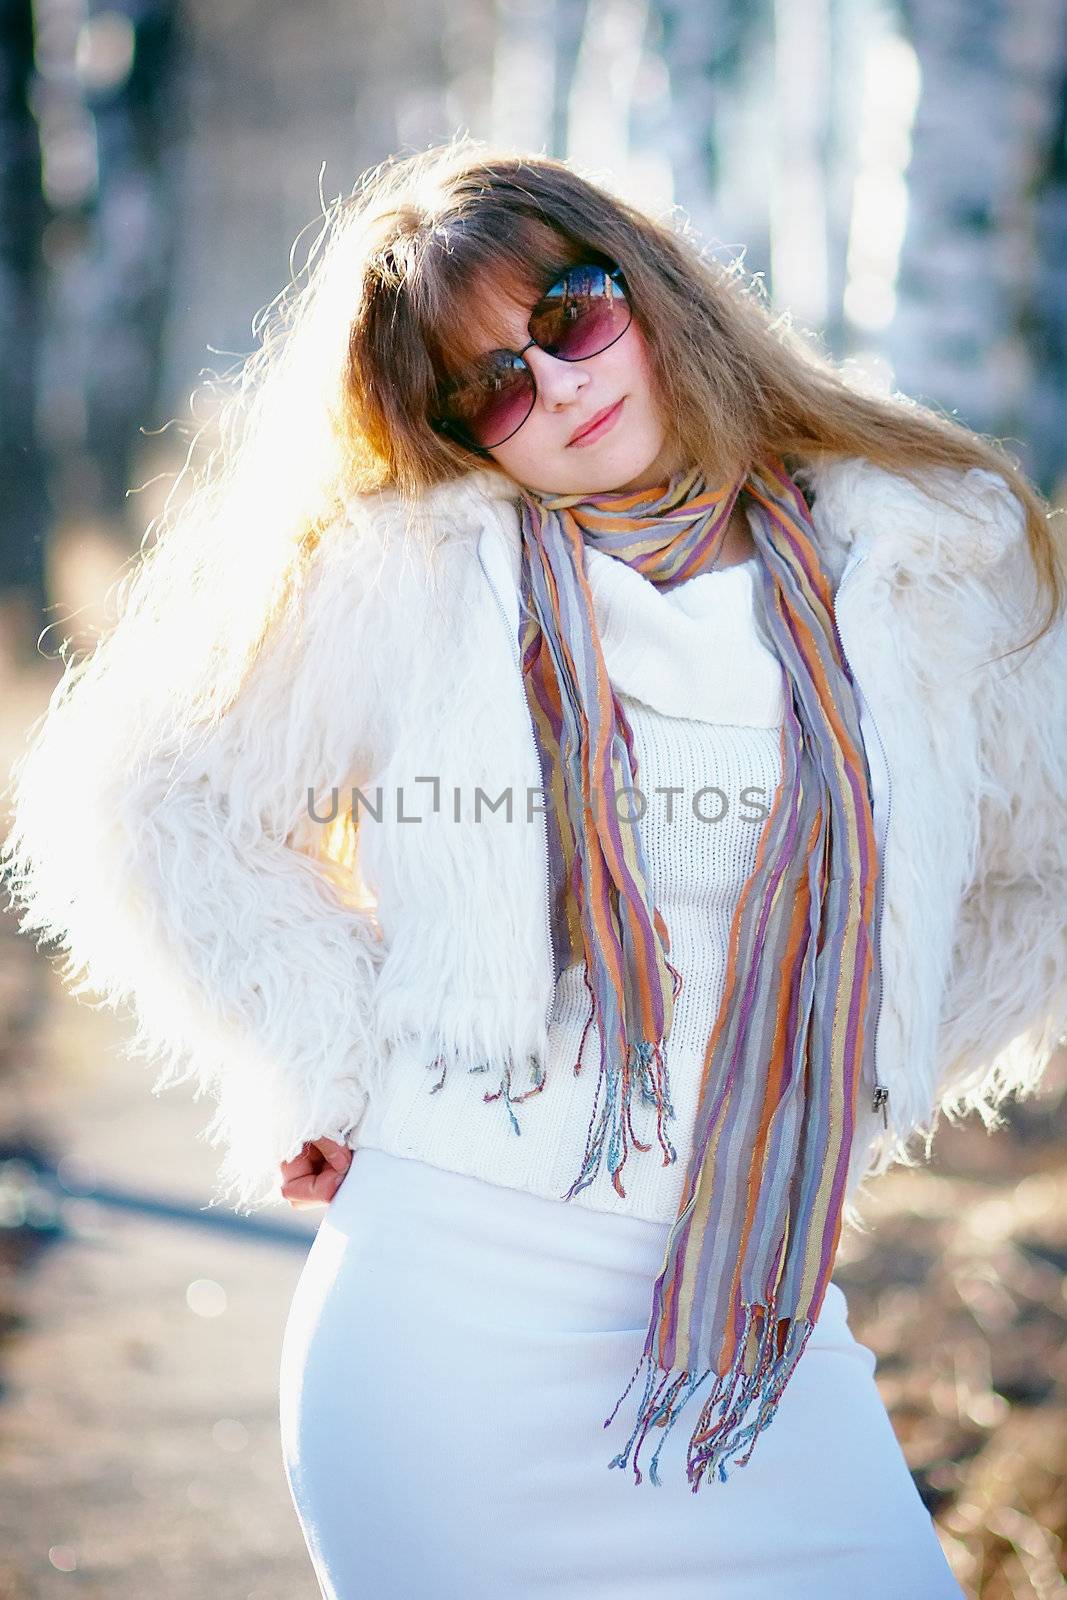 The beautiful girl in sunglasses in a white fluffy jacket